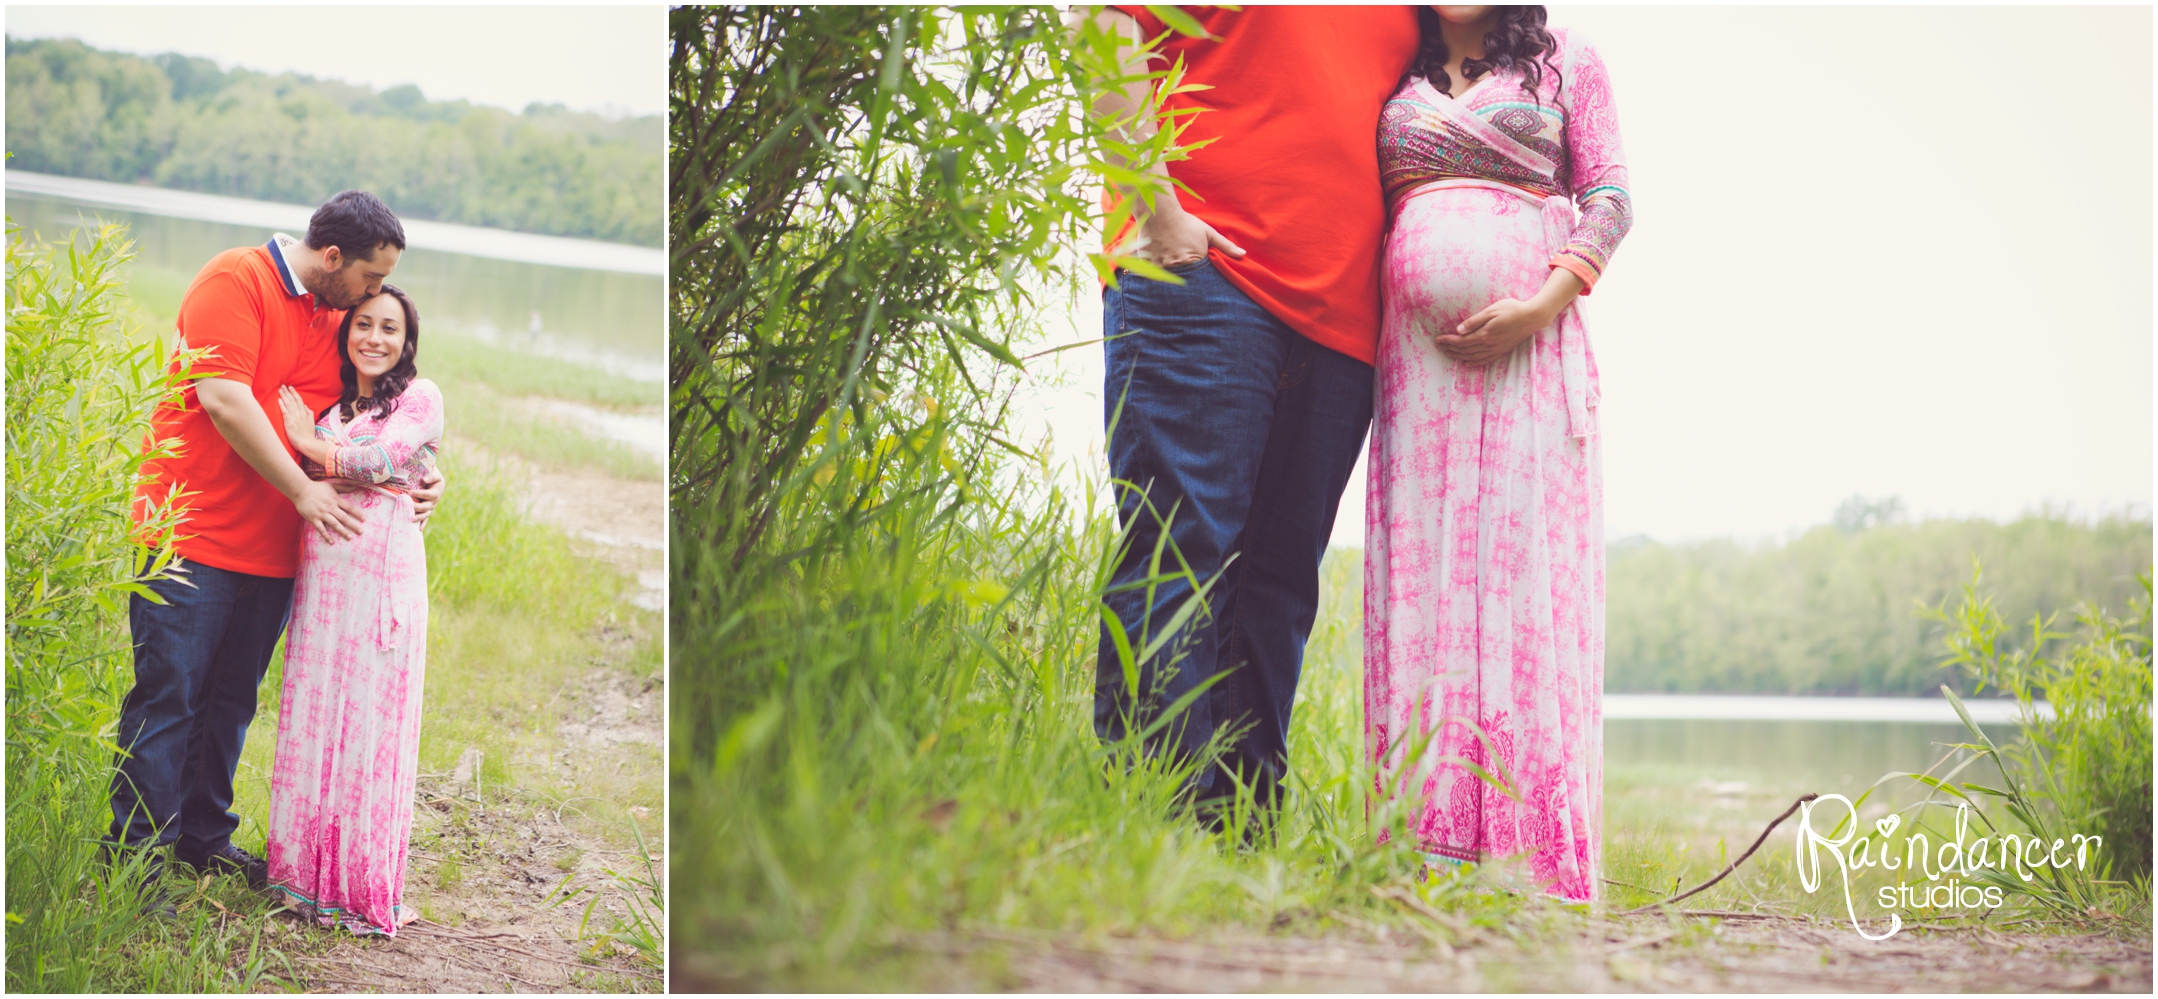 Indianapolis Maternity photographer, Indy maternity photographer, Indianapolis family photographer, Indy family photographer, Indy newborn photographer, Indy maternity photography, Indianapolis maternity photography,